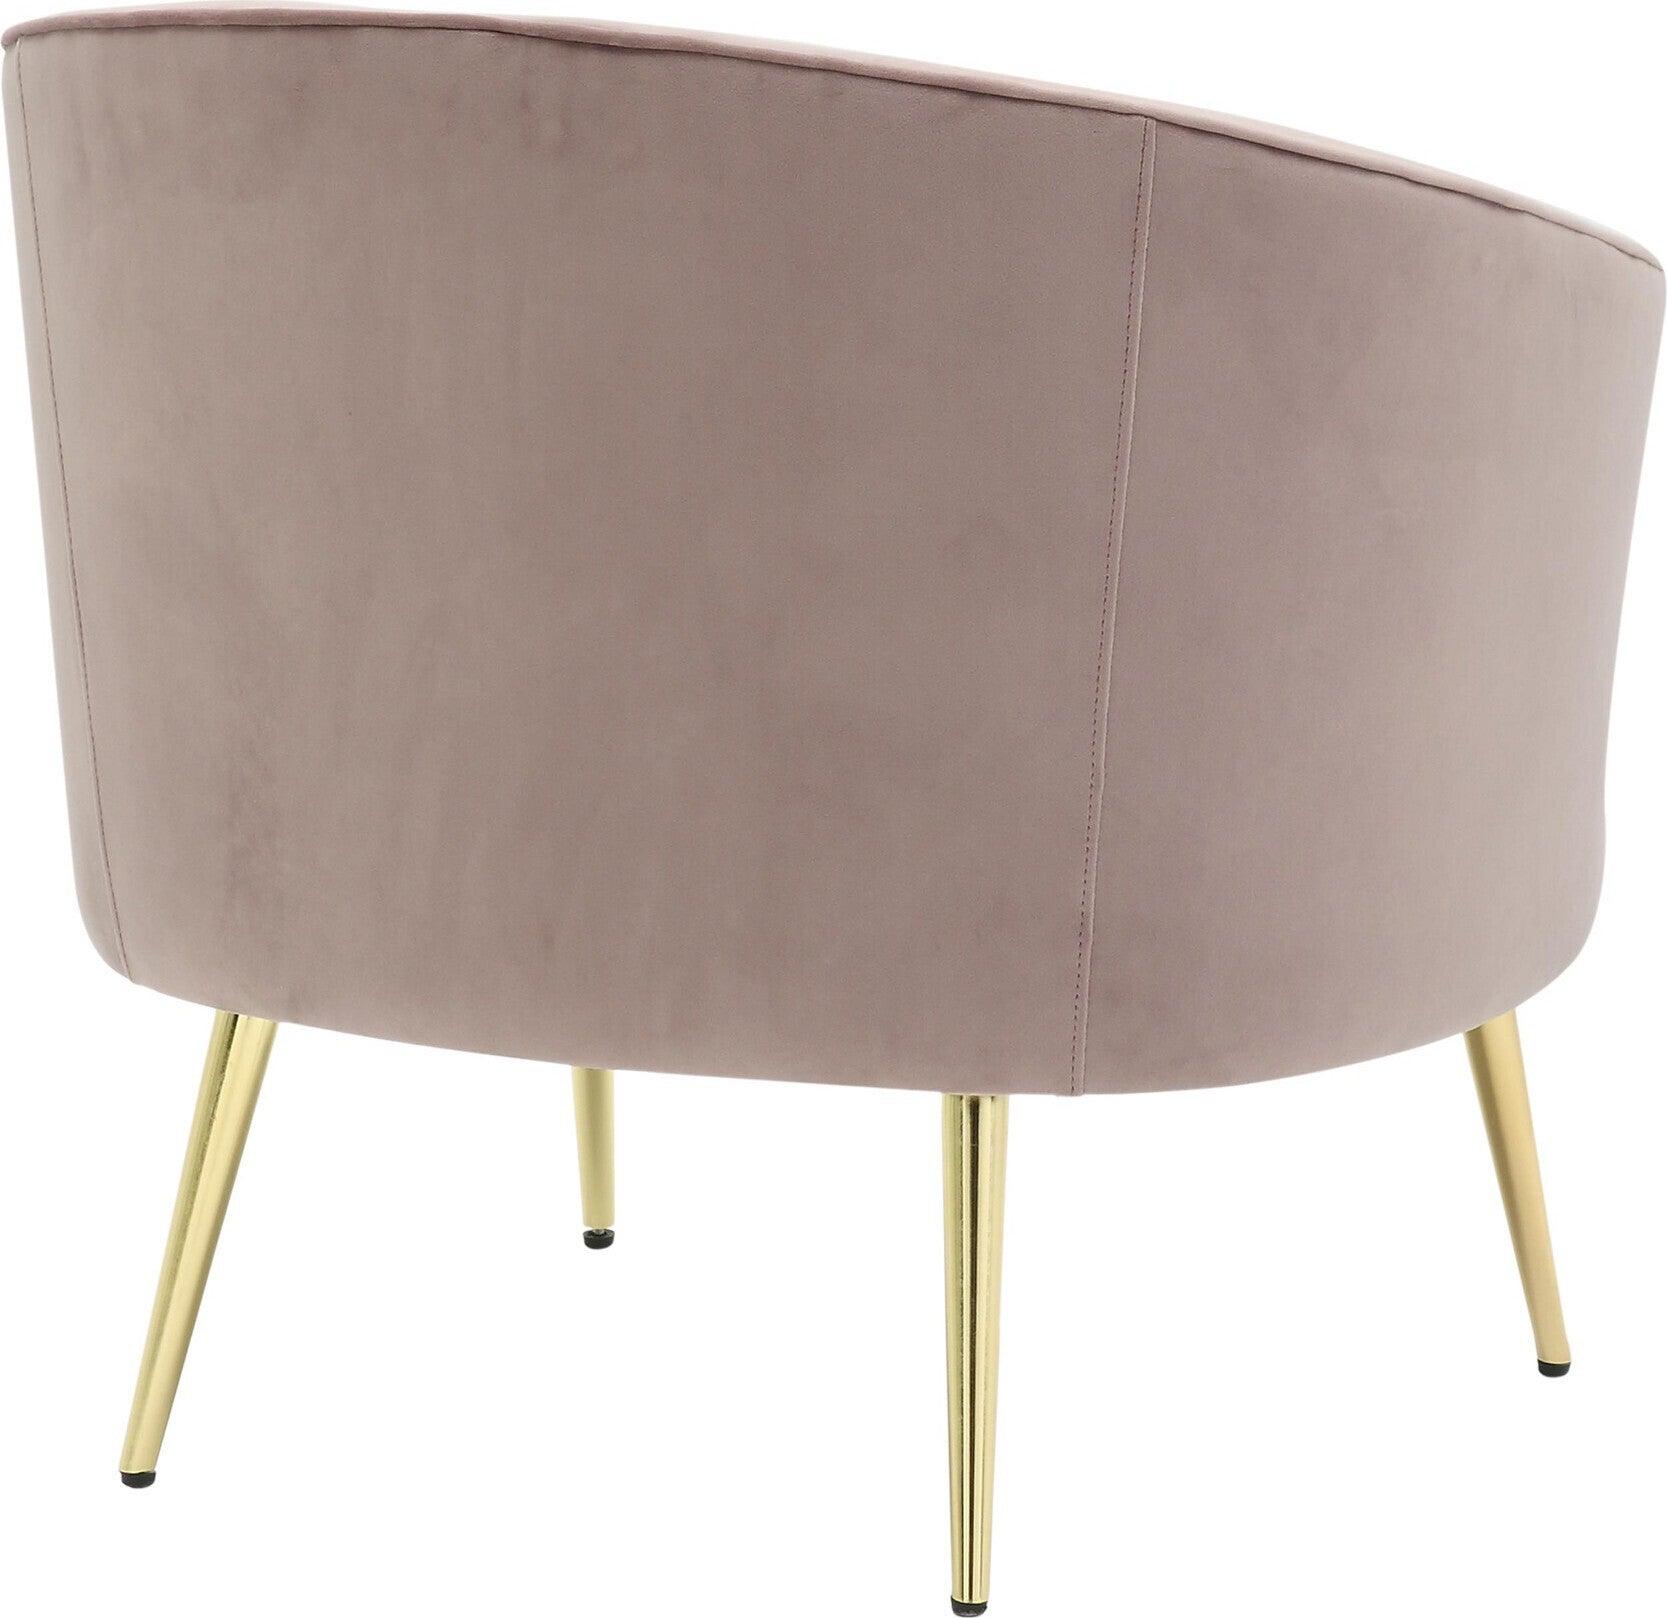 Lumisource Accent Chairs - Tania Accent Chair Gold & Blush